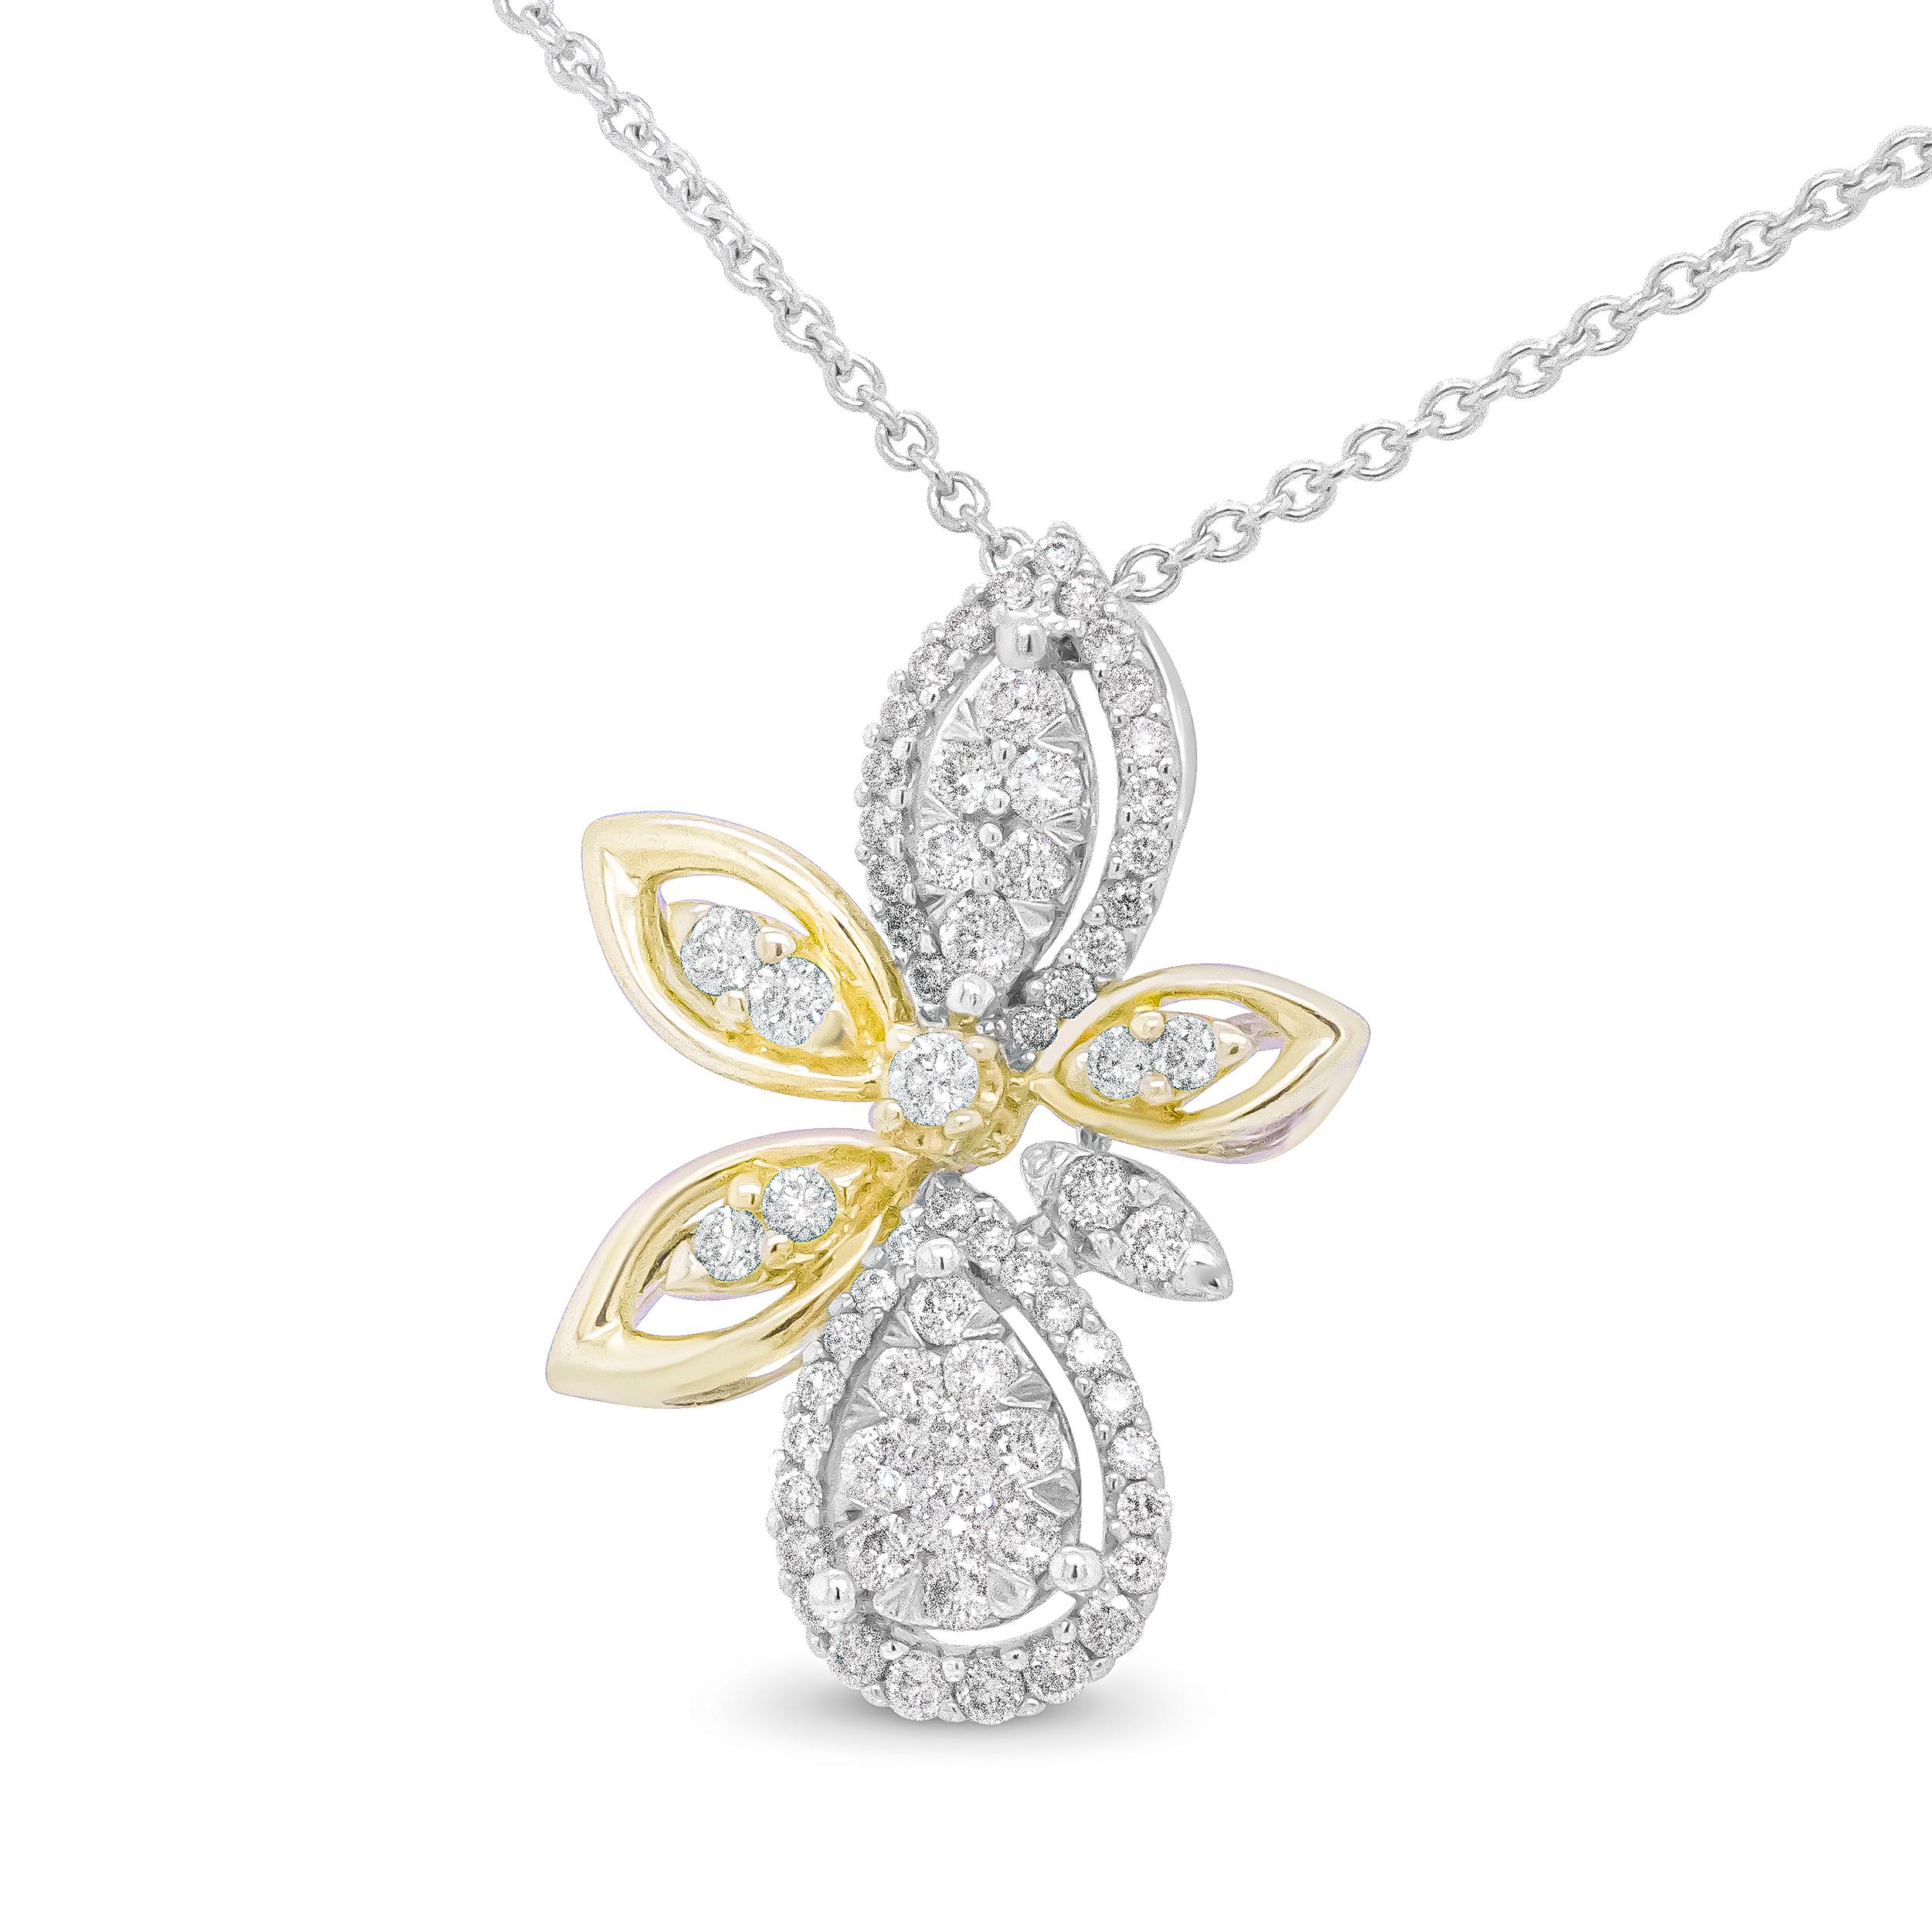 A novel design of striking individuality, this diamond pendant necklace evokes a freeform silhouette in a floral-style depiction. Delicate in detail, this striking piece showcases a vintage-inspired marquise motif set with sparkling round diamonds